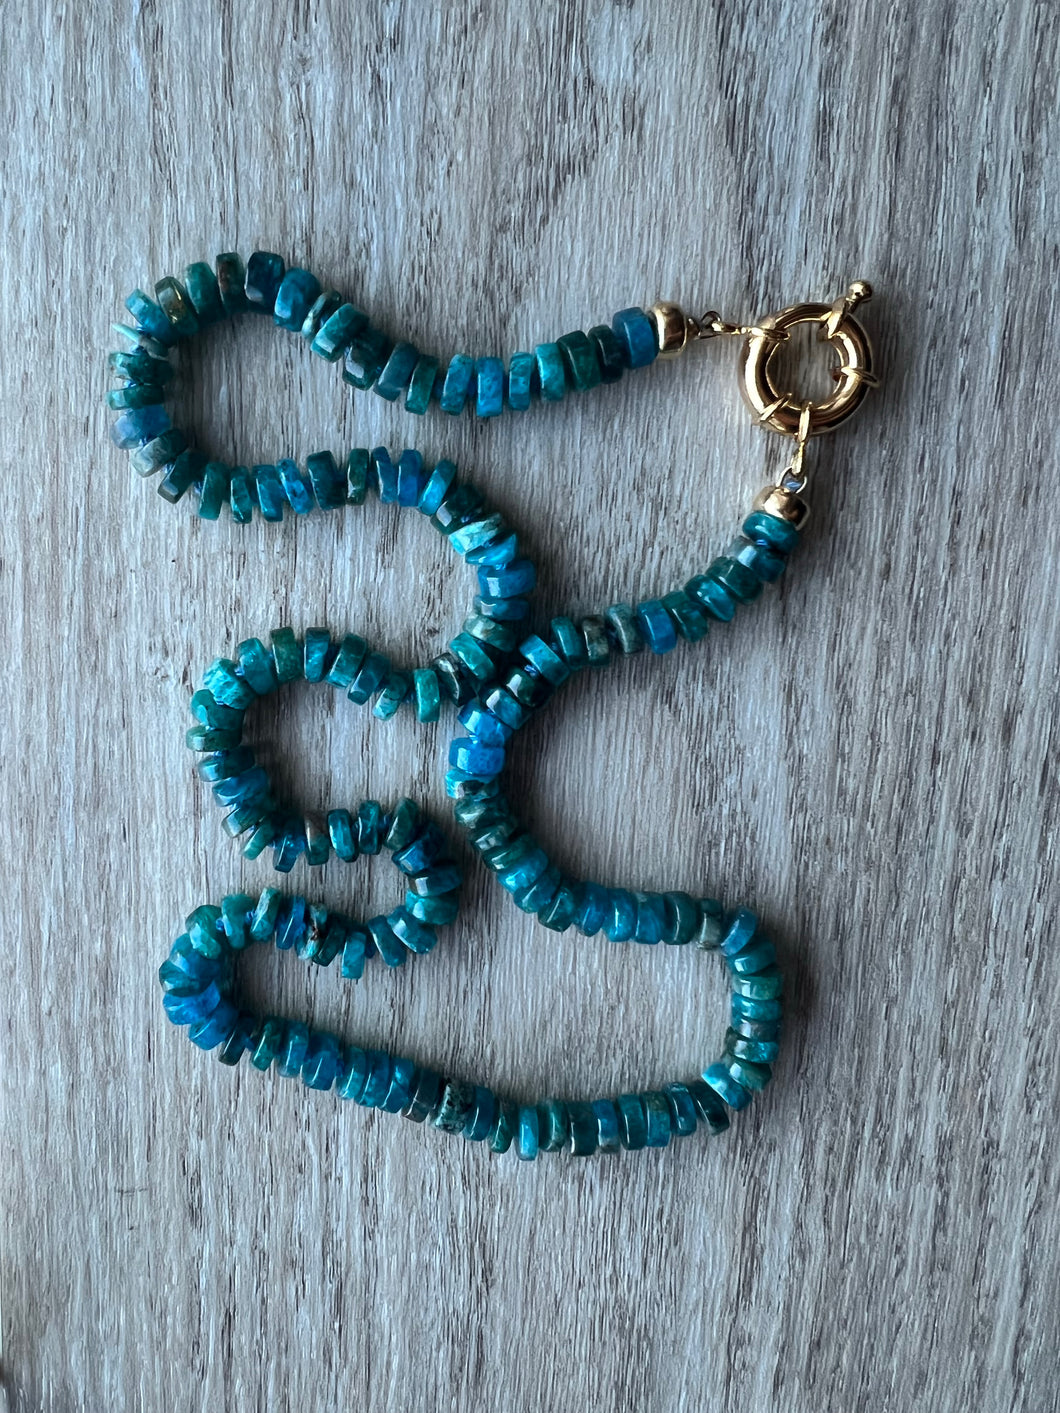 Hand knotted on blue silk, these pretty blue apatite heishi beads come together to create a stunning 19 inch necklace that's perfect on it's own or in your favorite necklace stack Finished off with gold filled end caps and a gold filled sailor's clasp